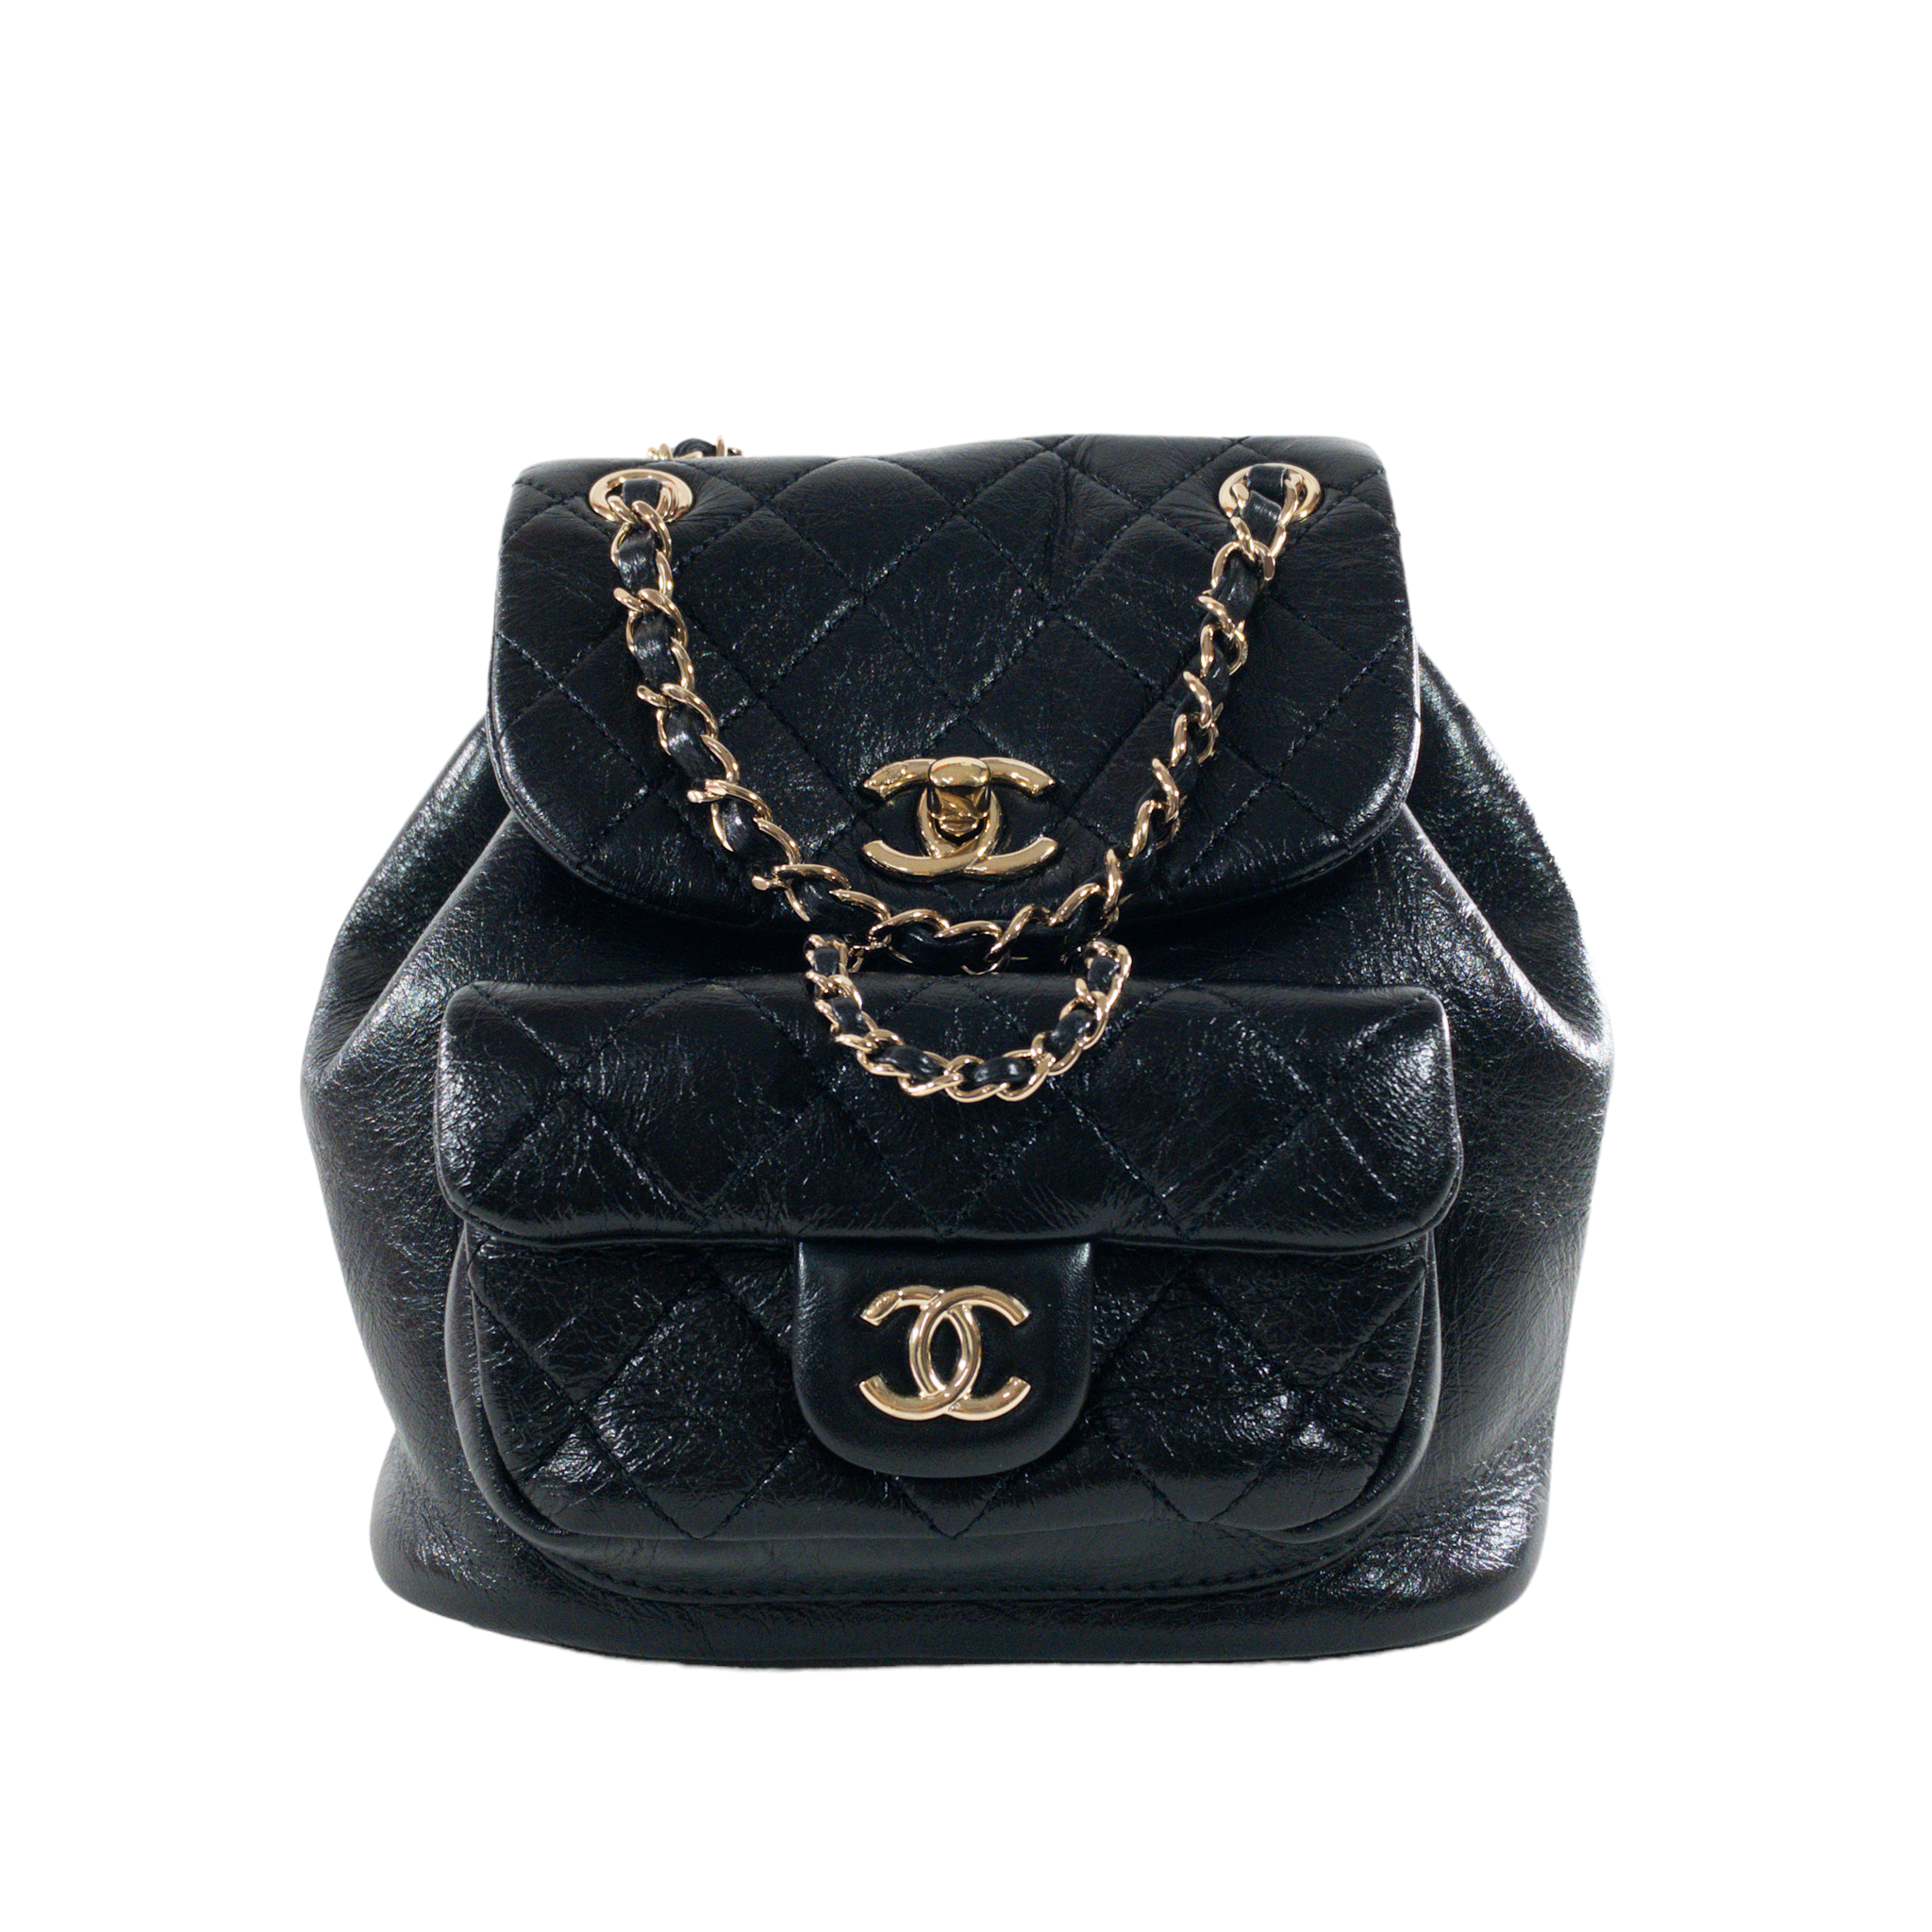 Buy CHANEL Duma Black Leather Backpack, Exclusive SALE